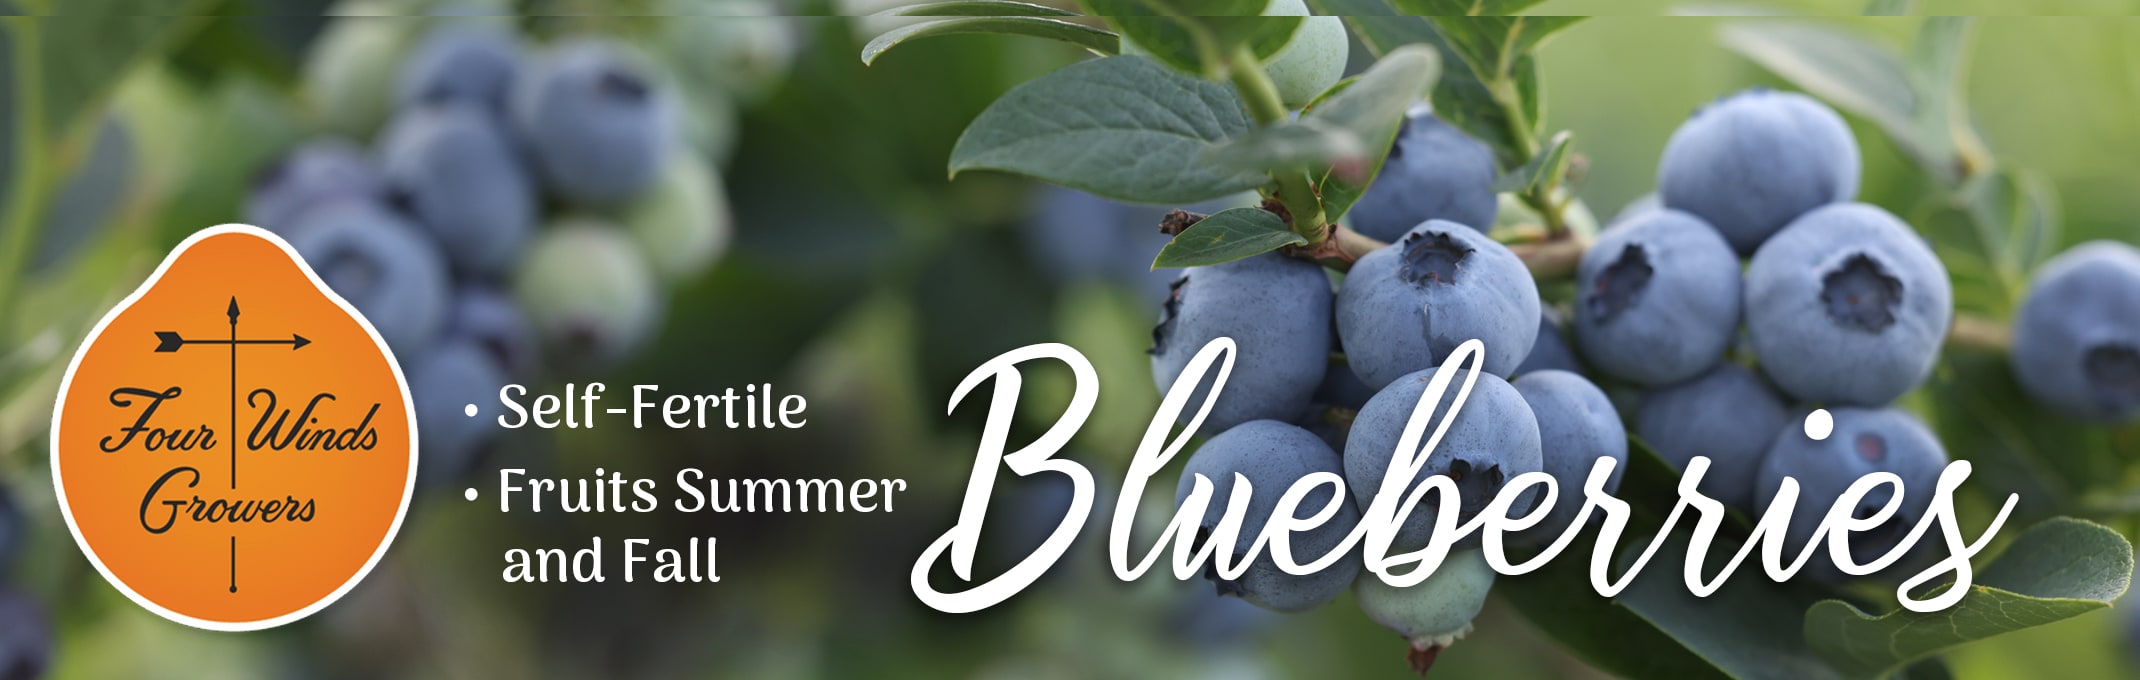 blueberries with 4 winds growers logo and self-fertile and fruites summer and fall bullets listed